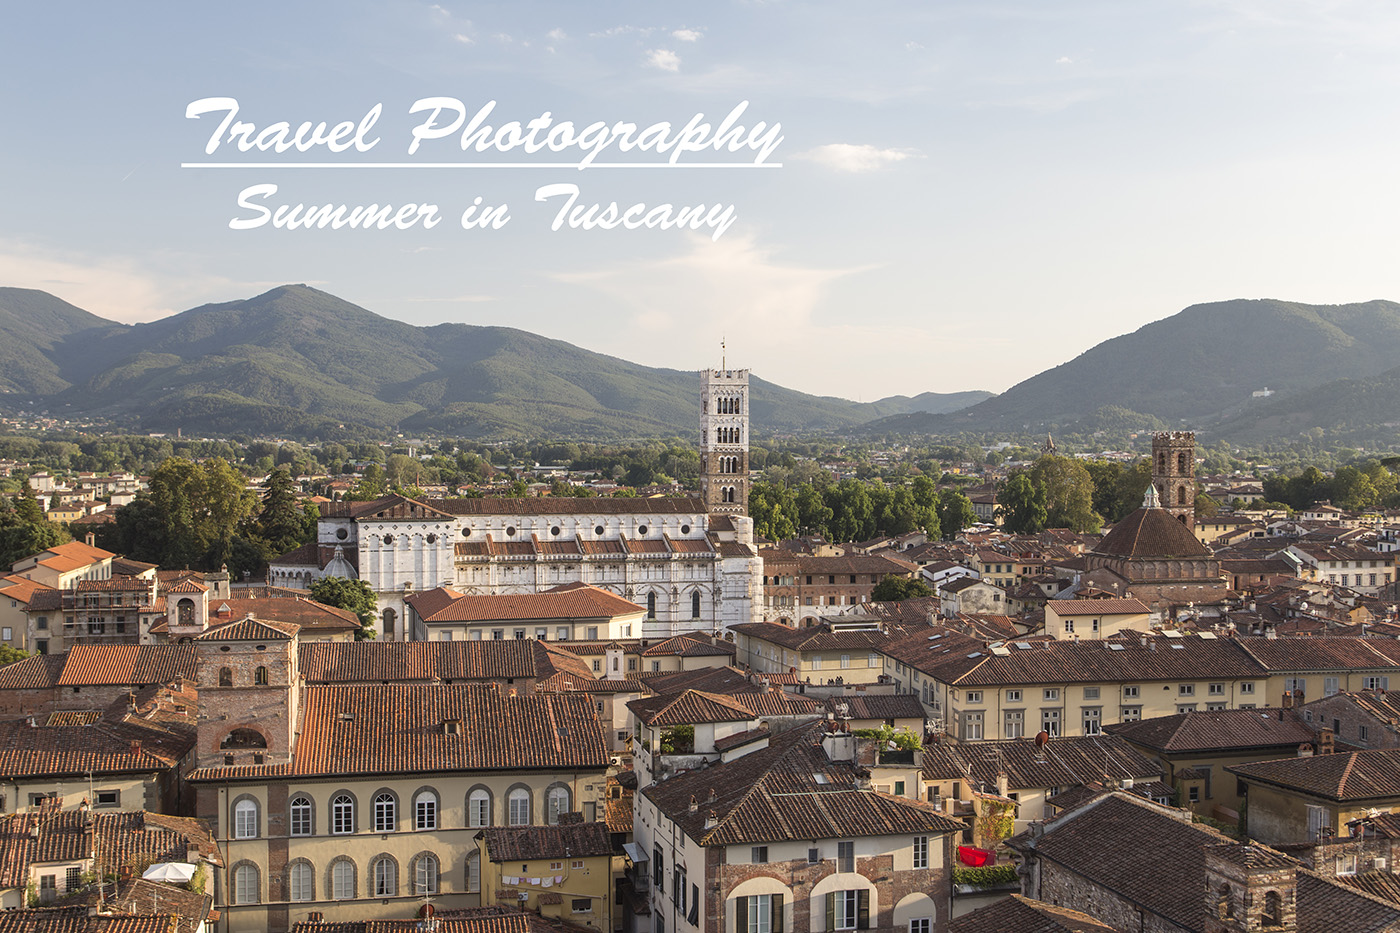 The Duomo and the old city of Lucca